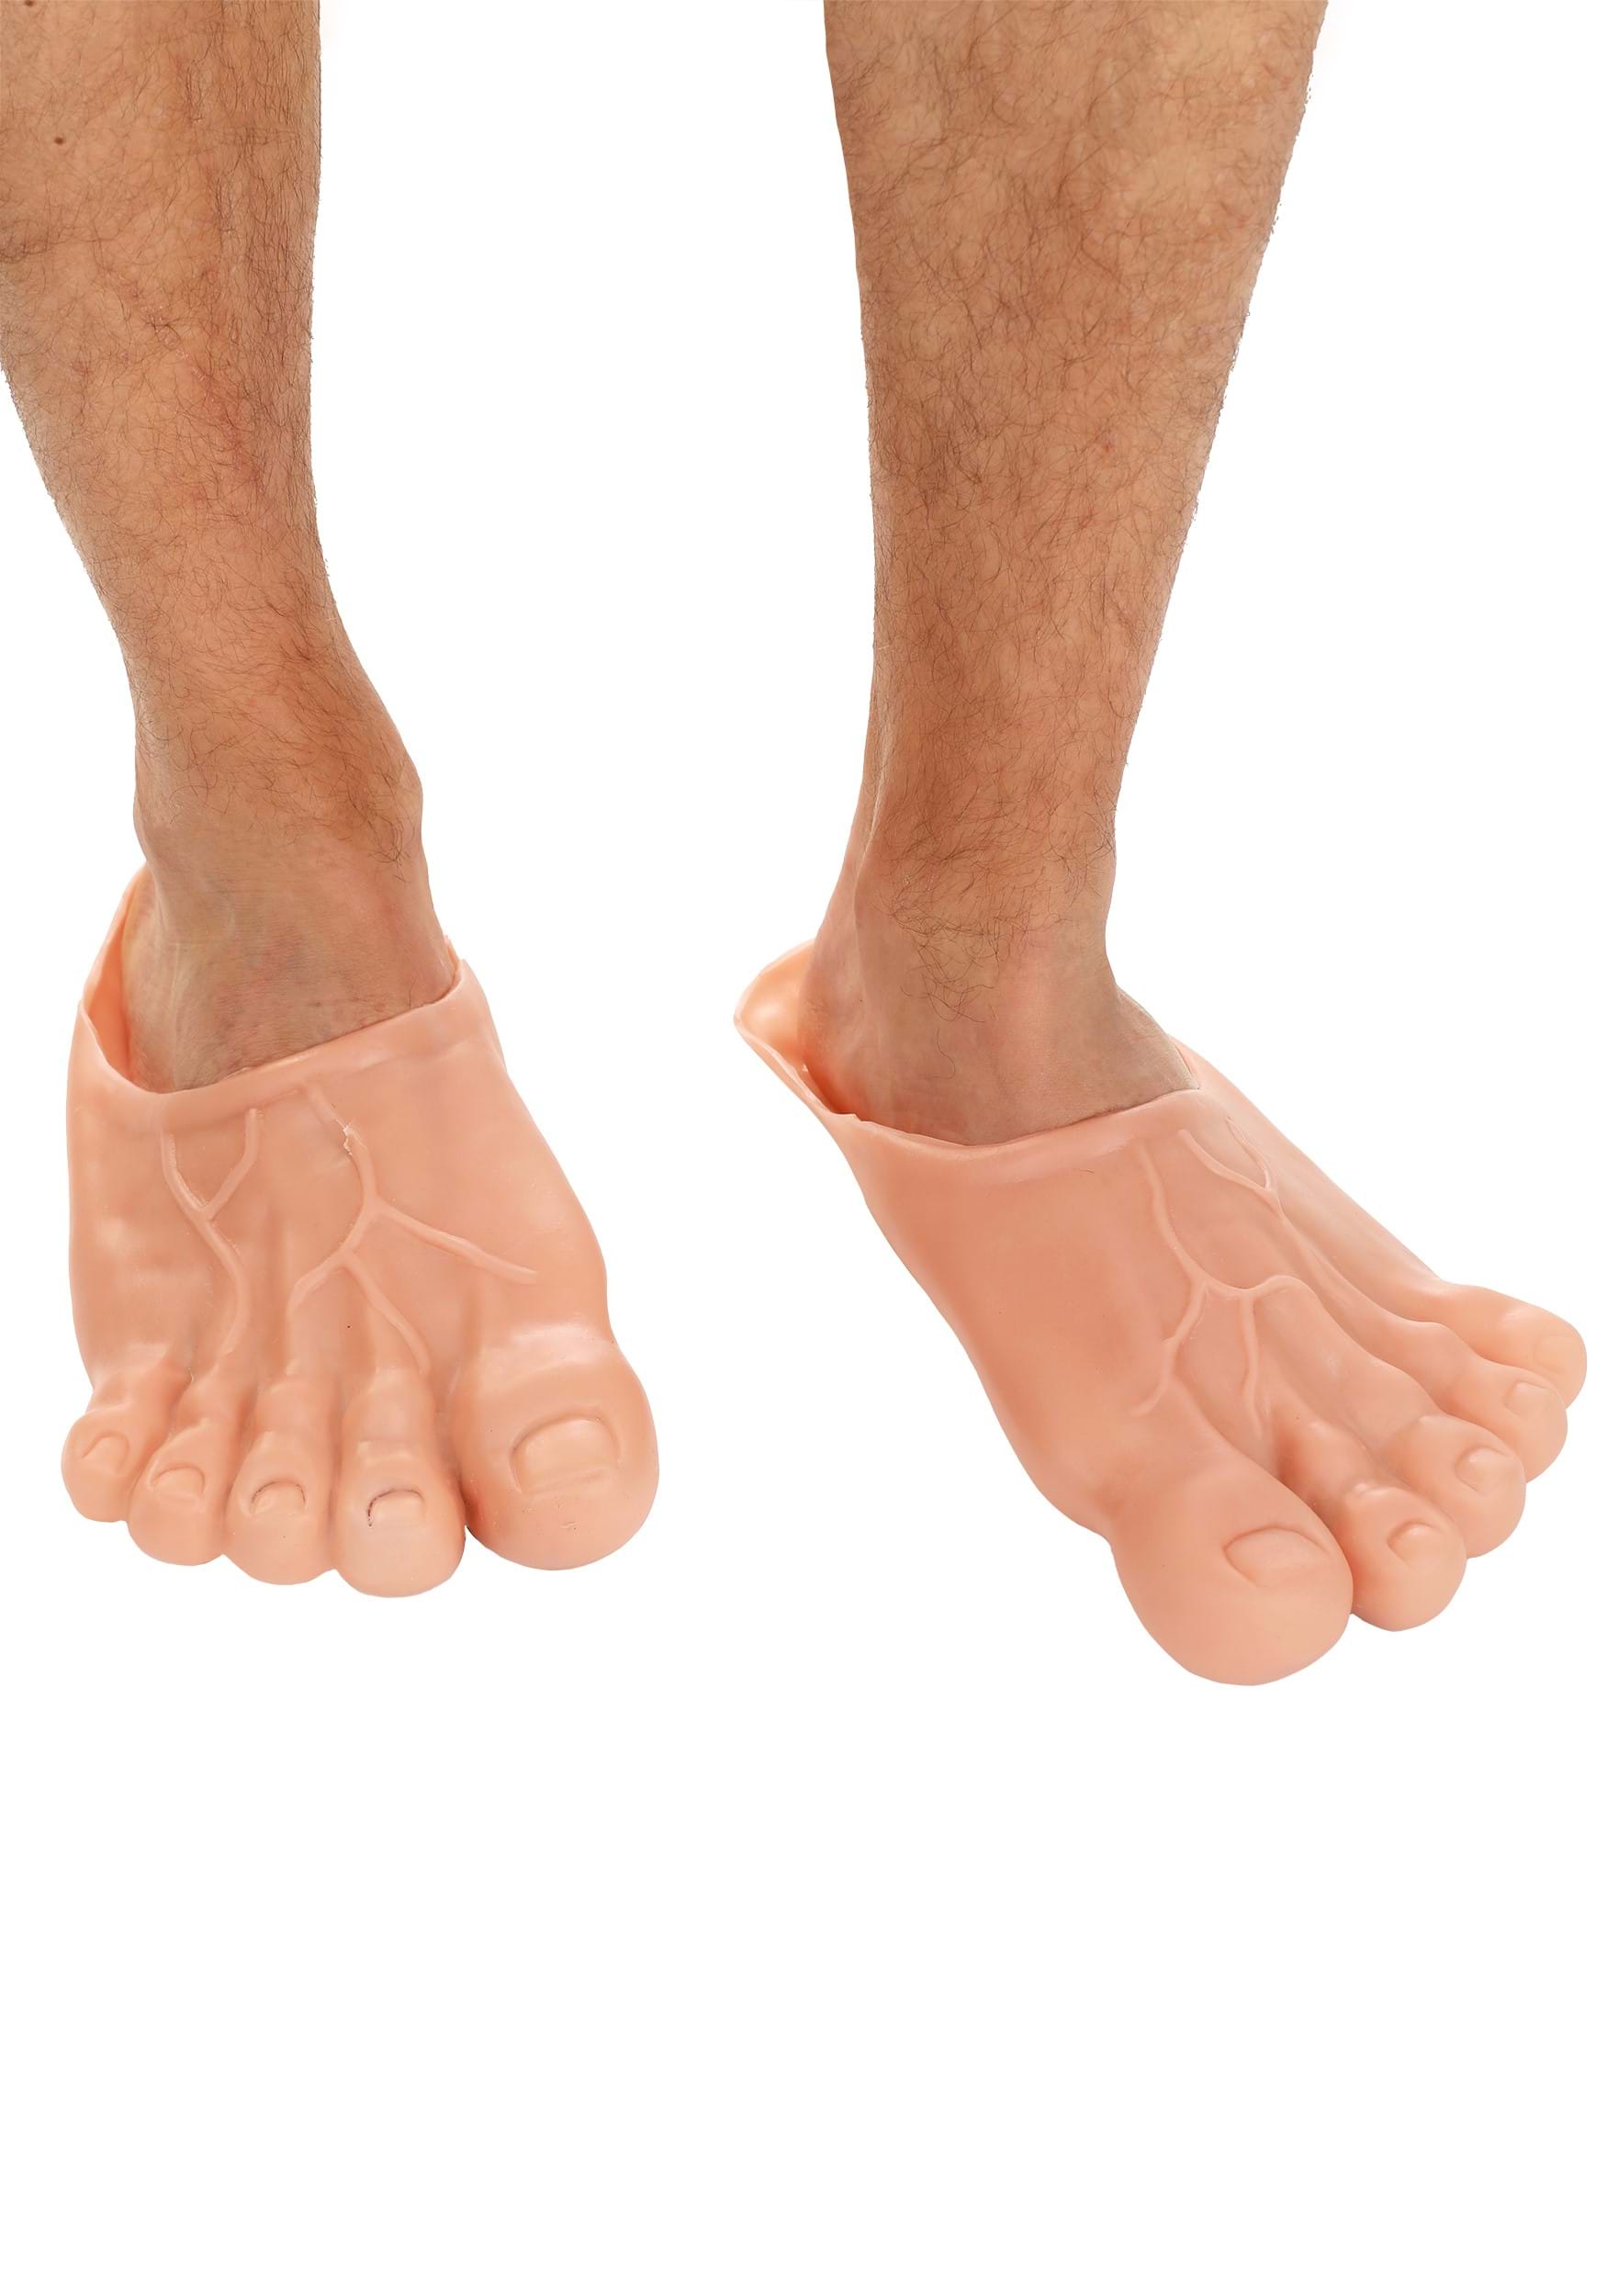 My newest fake invention is the FlopFlips. Sandals with reverse soles so it  looks like you were walking the opposite direction on the beach. See ya  later stalkers! : r/funny